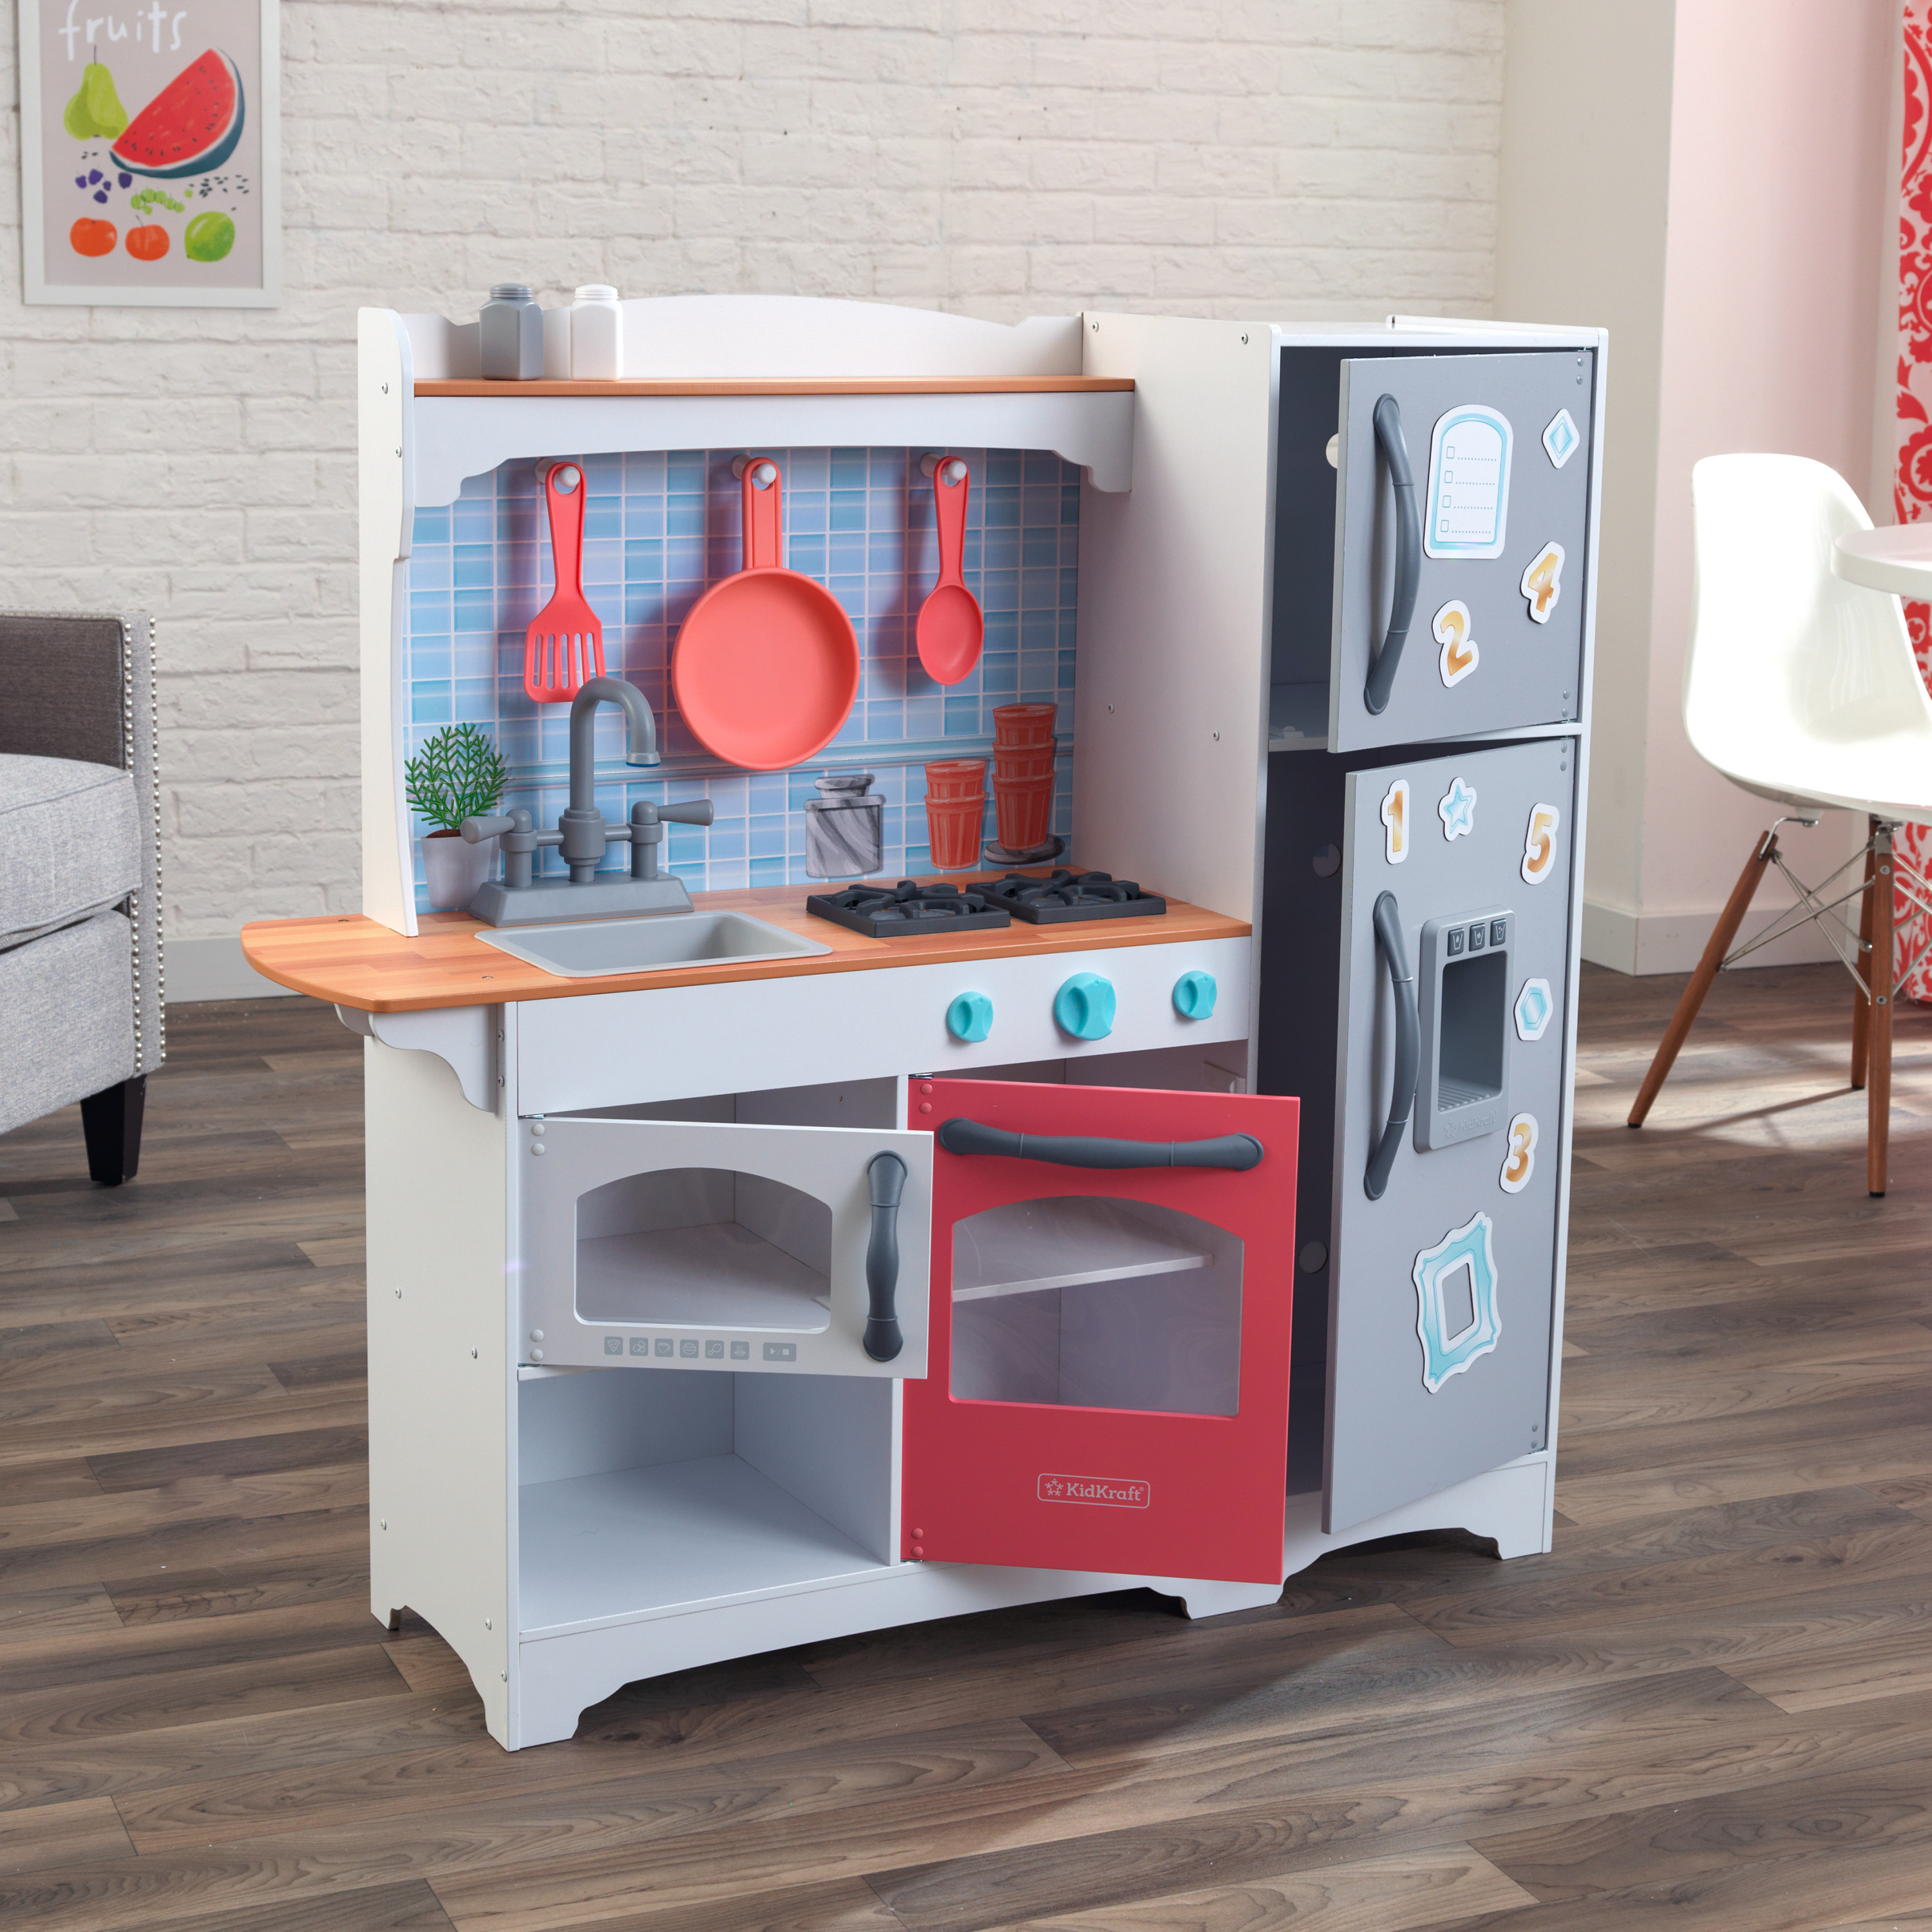 KidKraft Mosaic Magnetic Play Kitchen for Kids, Gray and Pink - image 3 of 12